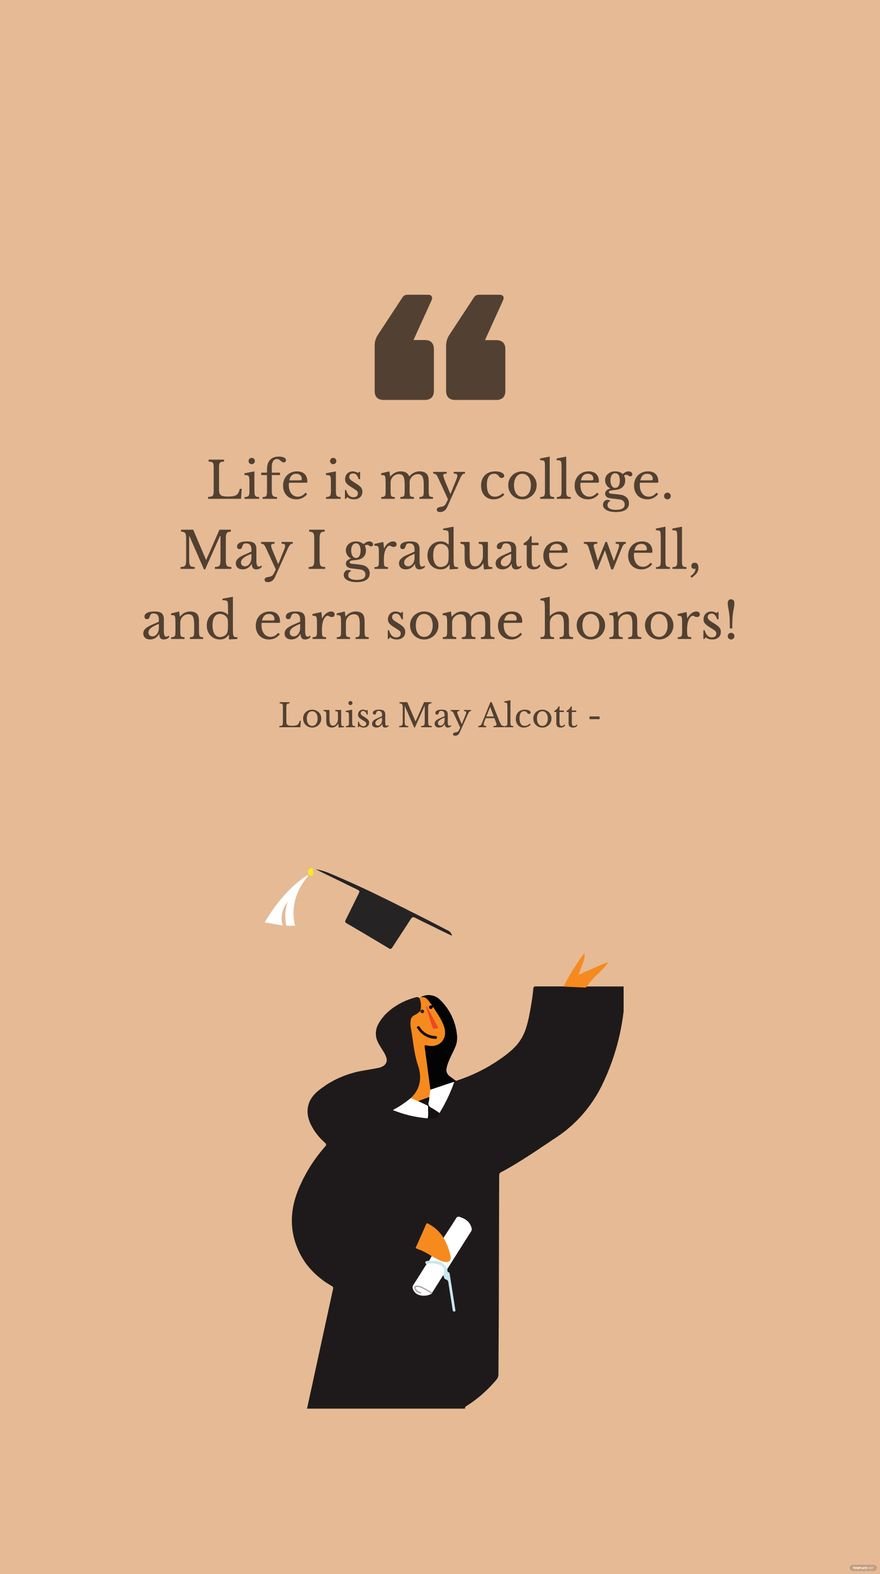 Louisa May Alcott - Life is my college. May I graduate well, and earn some honors! in JPG